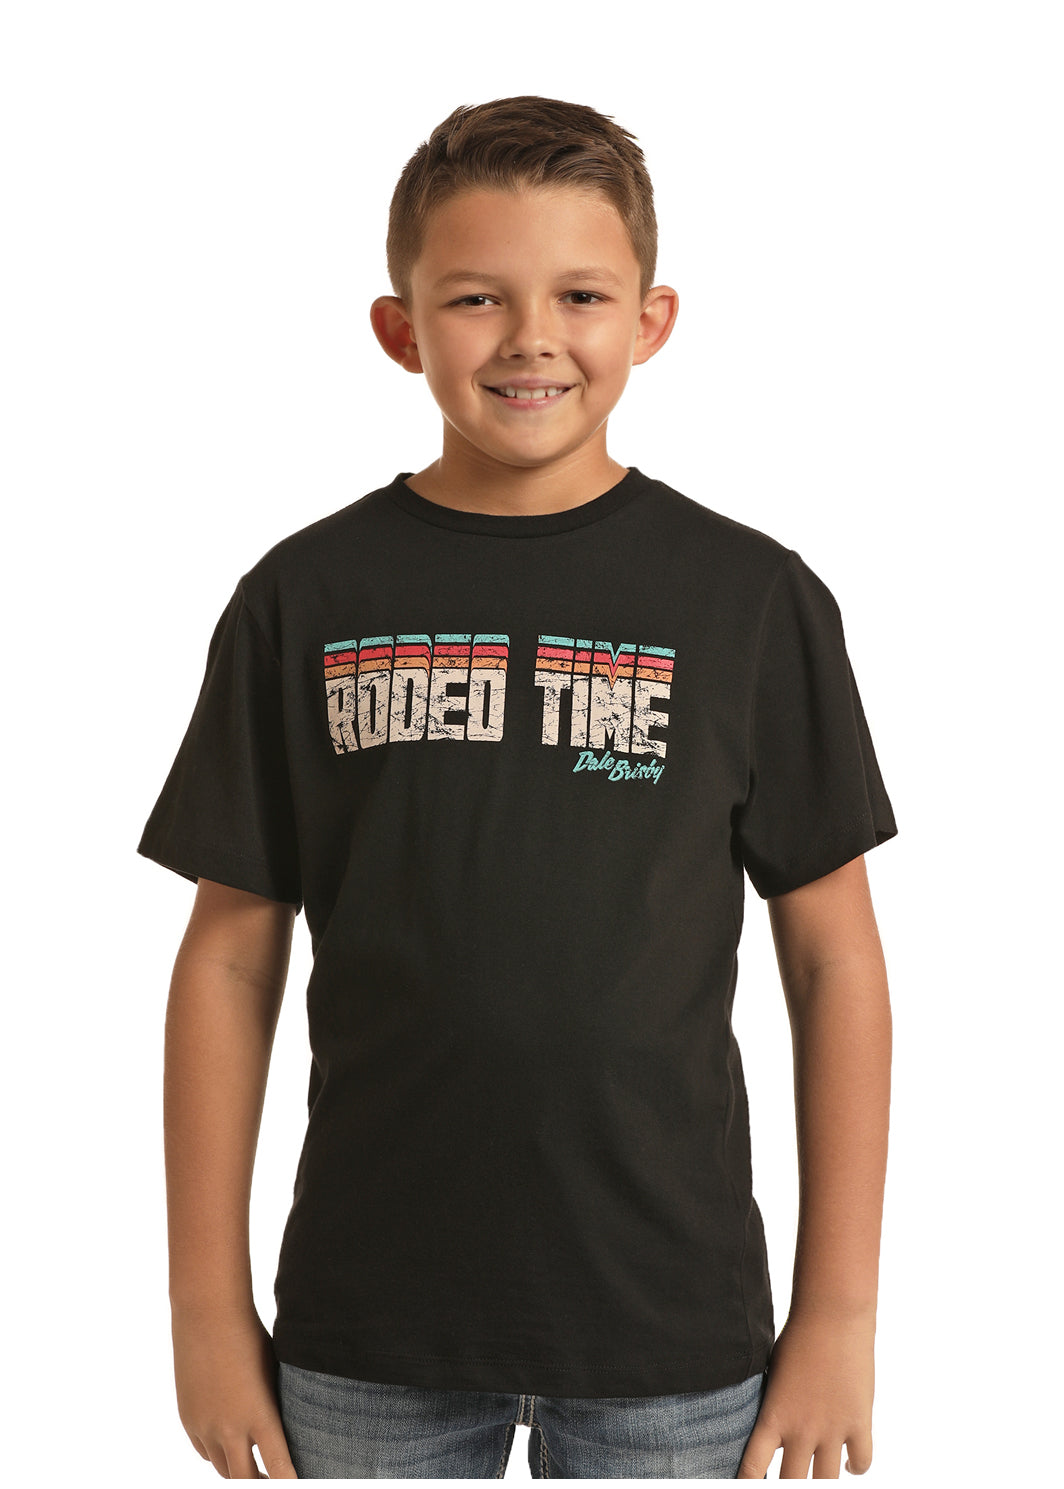 Dale Brisby Rodeo Time T-Shirt